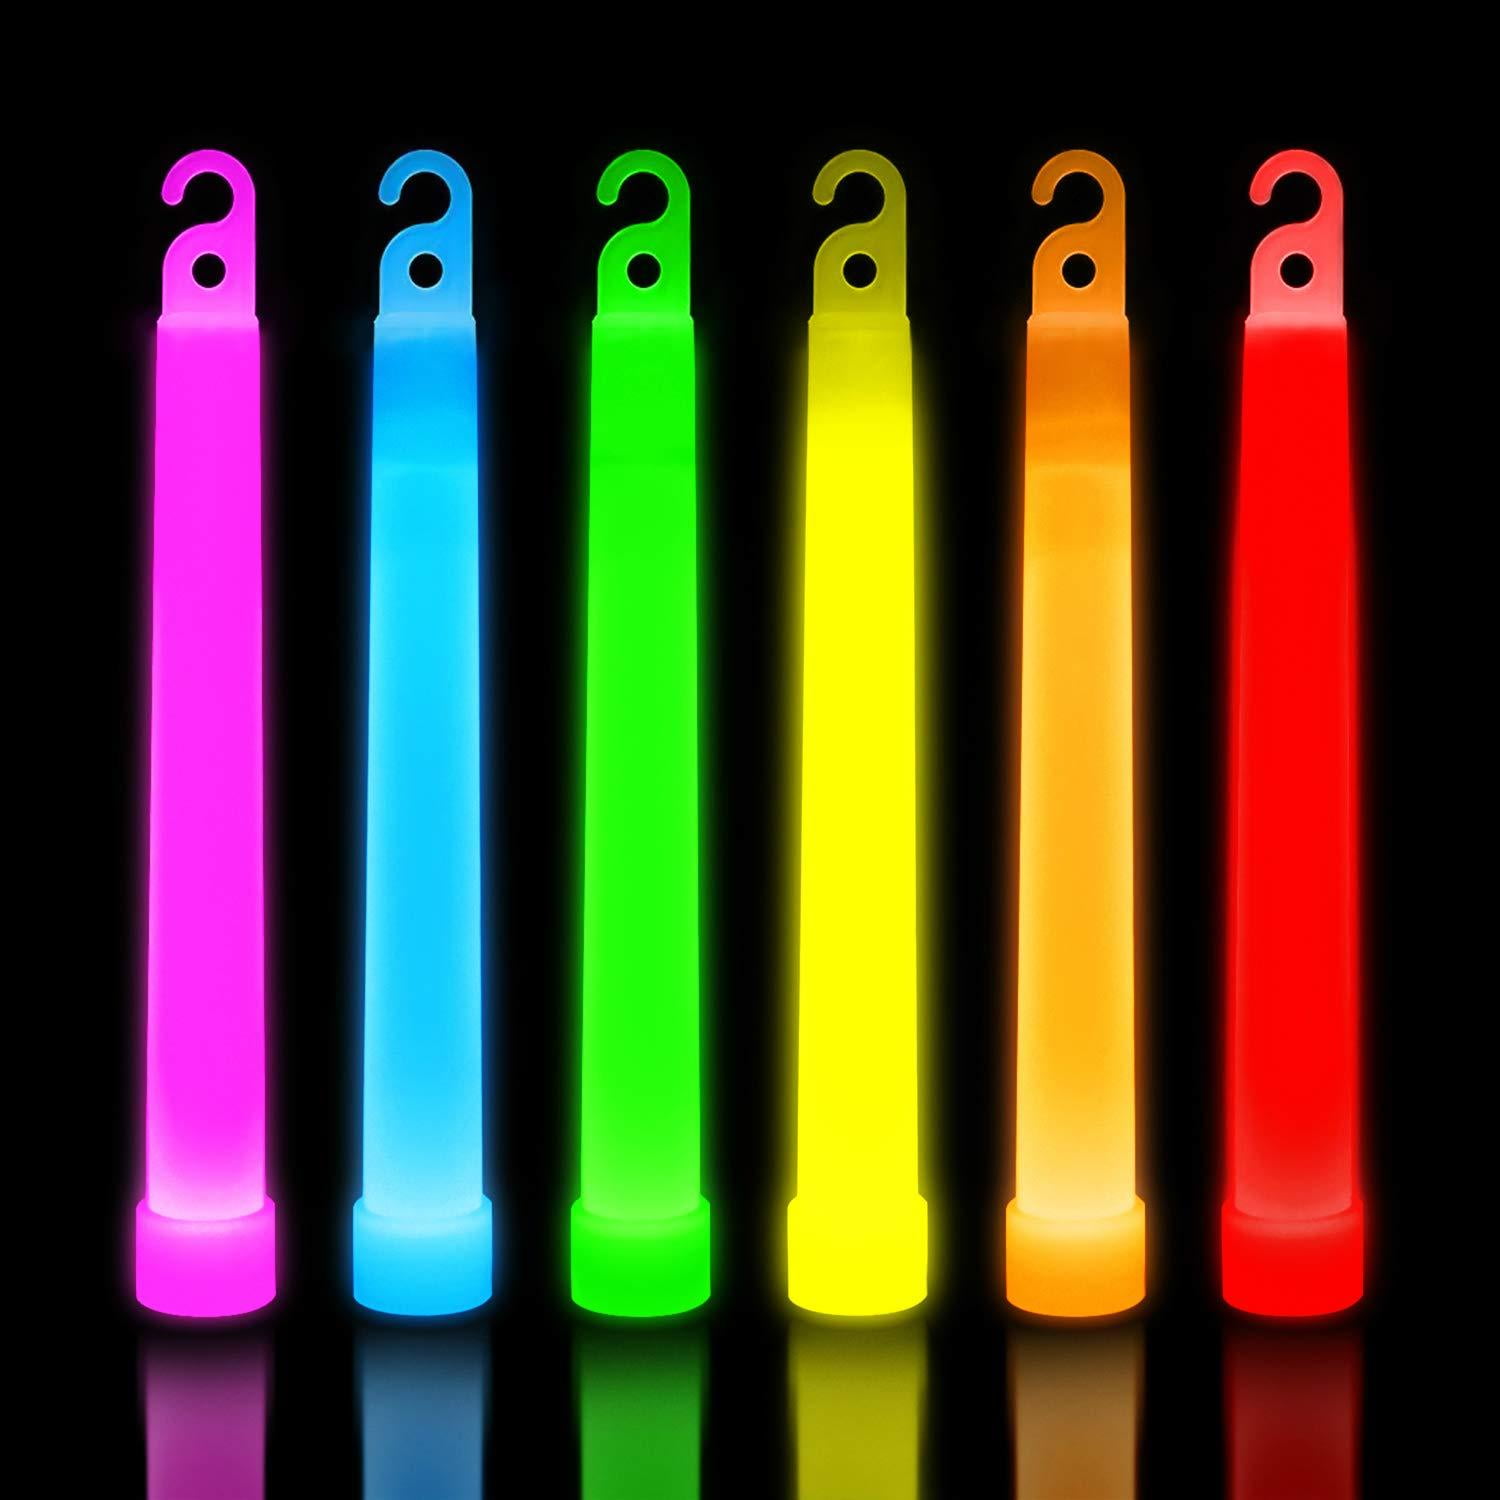 30 Ultra Bright Glow Sticks - Emergency Light Sticks for Camping  Accessories, Parties, Hurricane Supplies, Earthquake, Survival Kit and More  - Lasts Over 12 Hours (Multi Color) Multi Color 